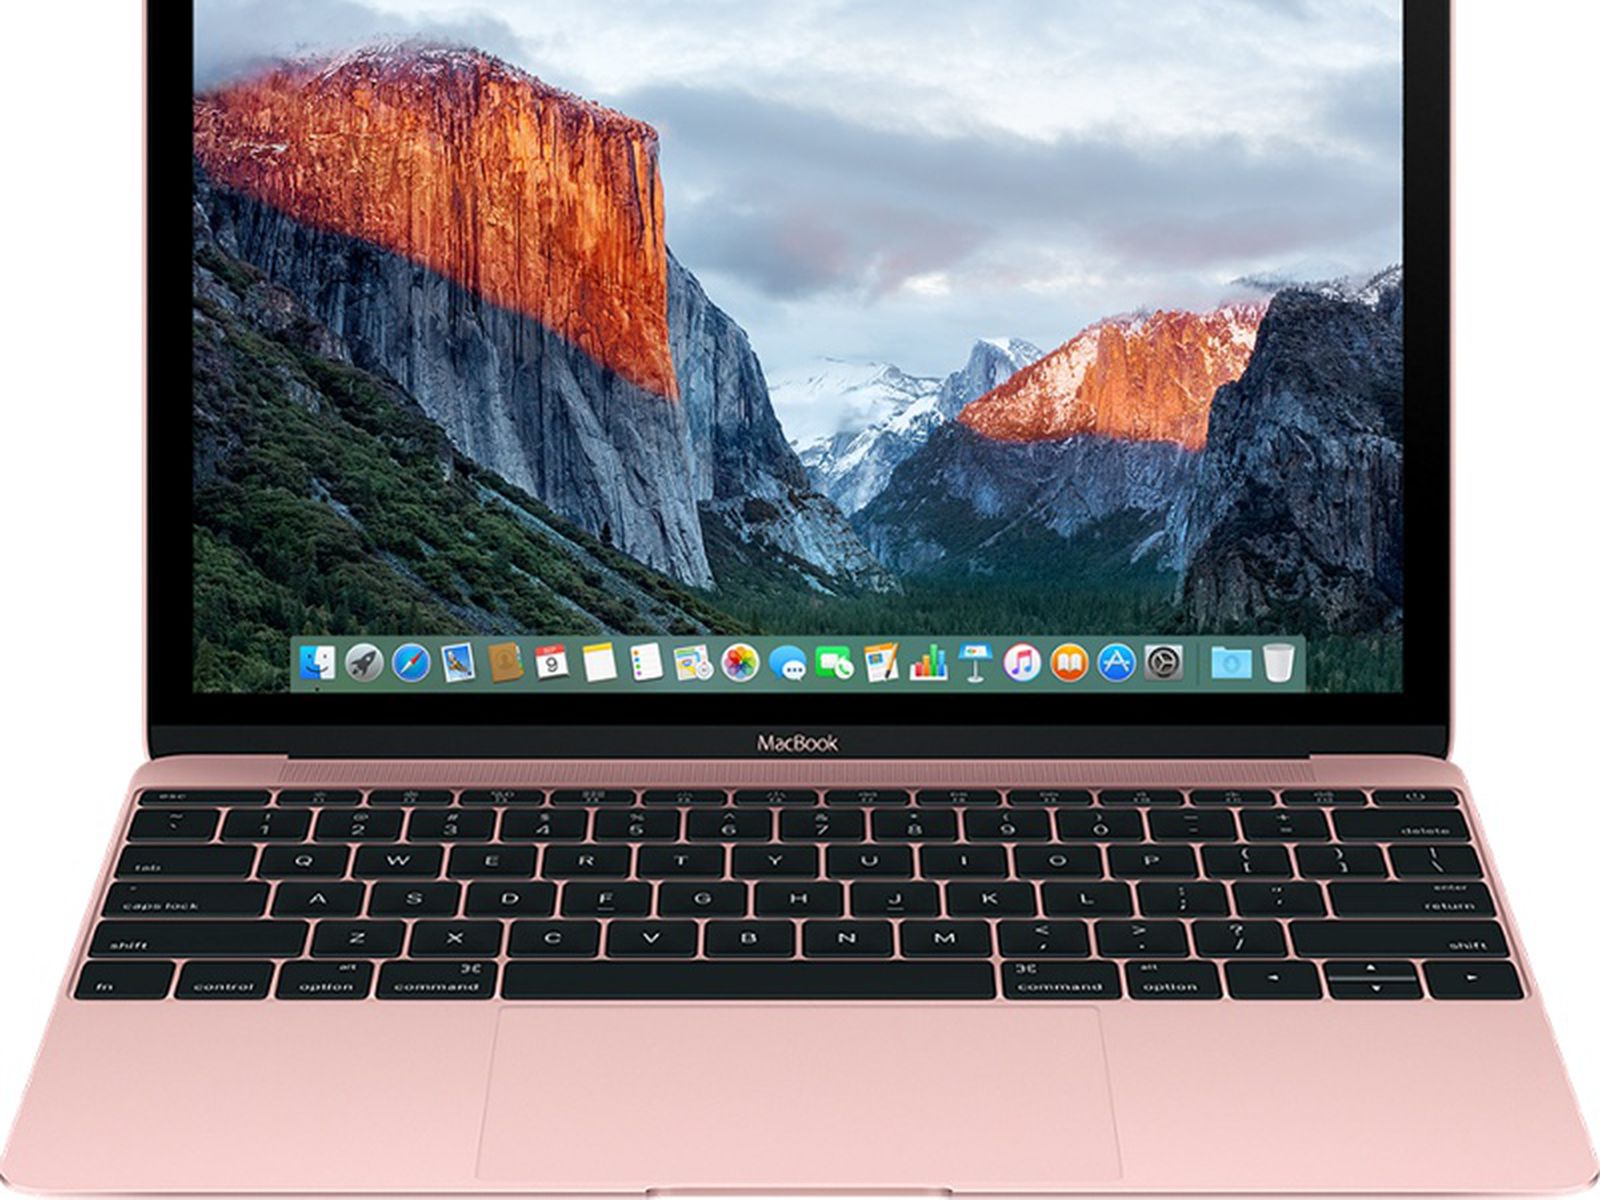 2016 MacBook Review Roundup: SSD Performance is Much Improved